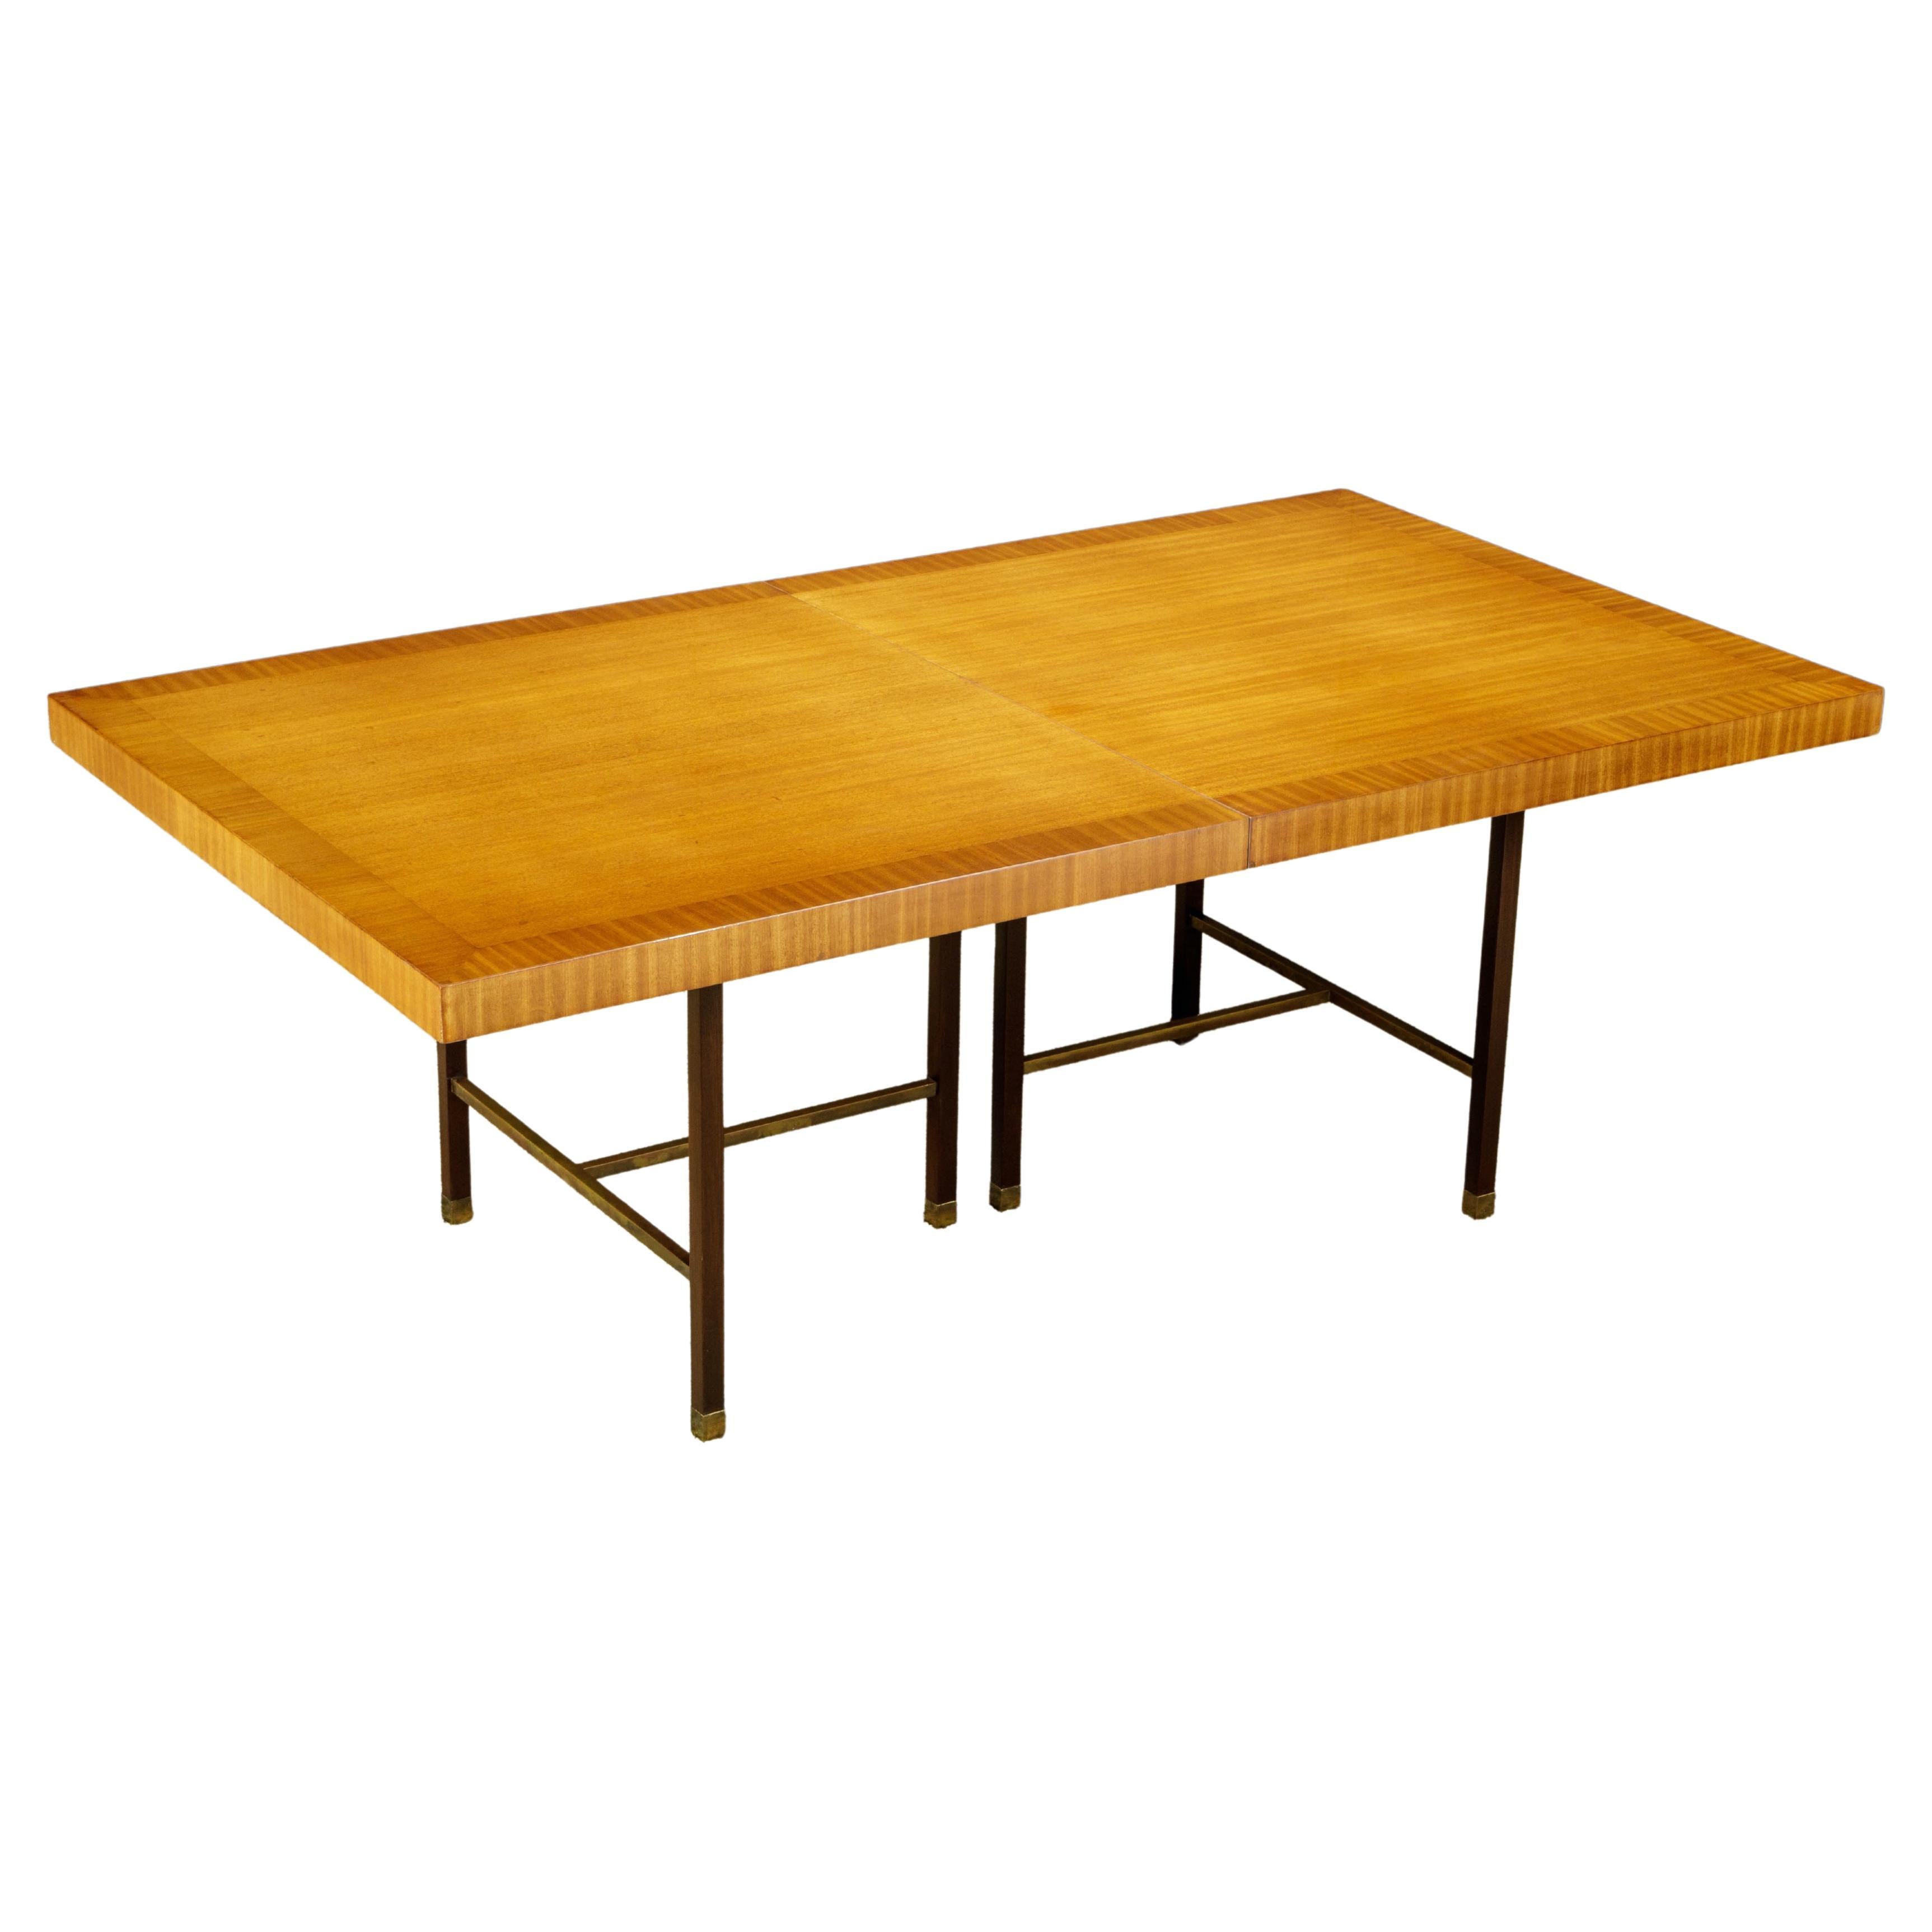 Harvey Probber 12-Person Extendable Dining Table in Mahogany and Brass, 1950s